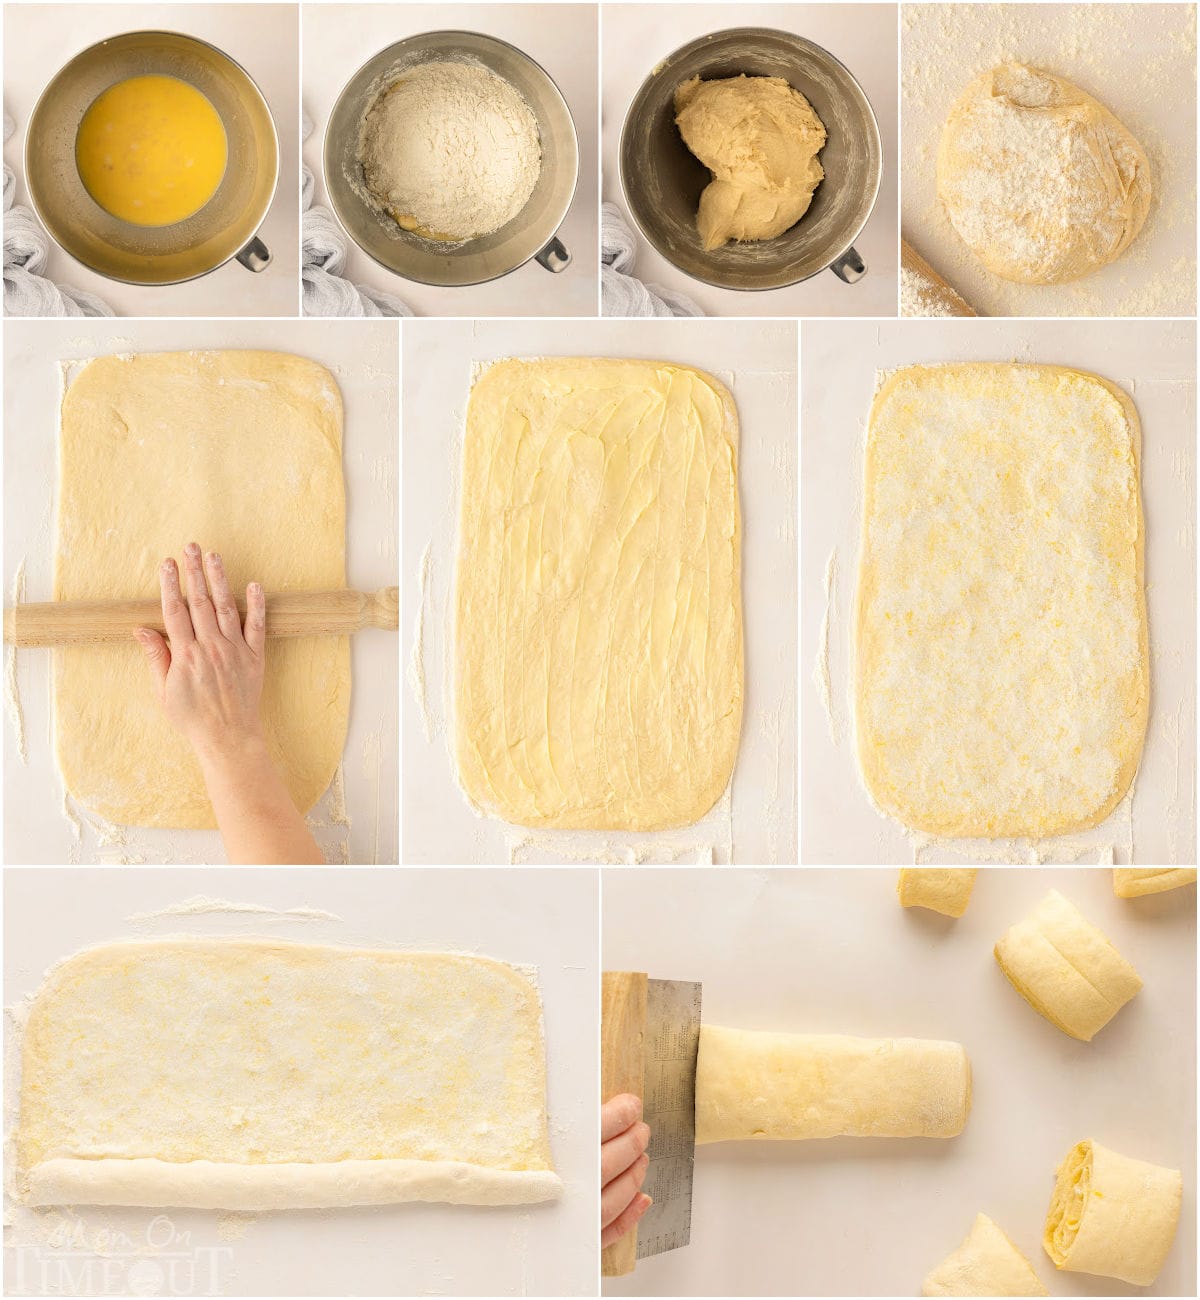 Collage process photos showing how to make lemon rolls.